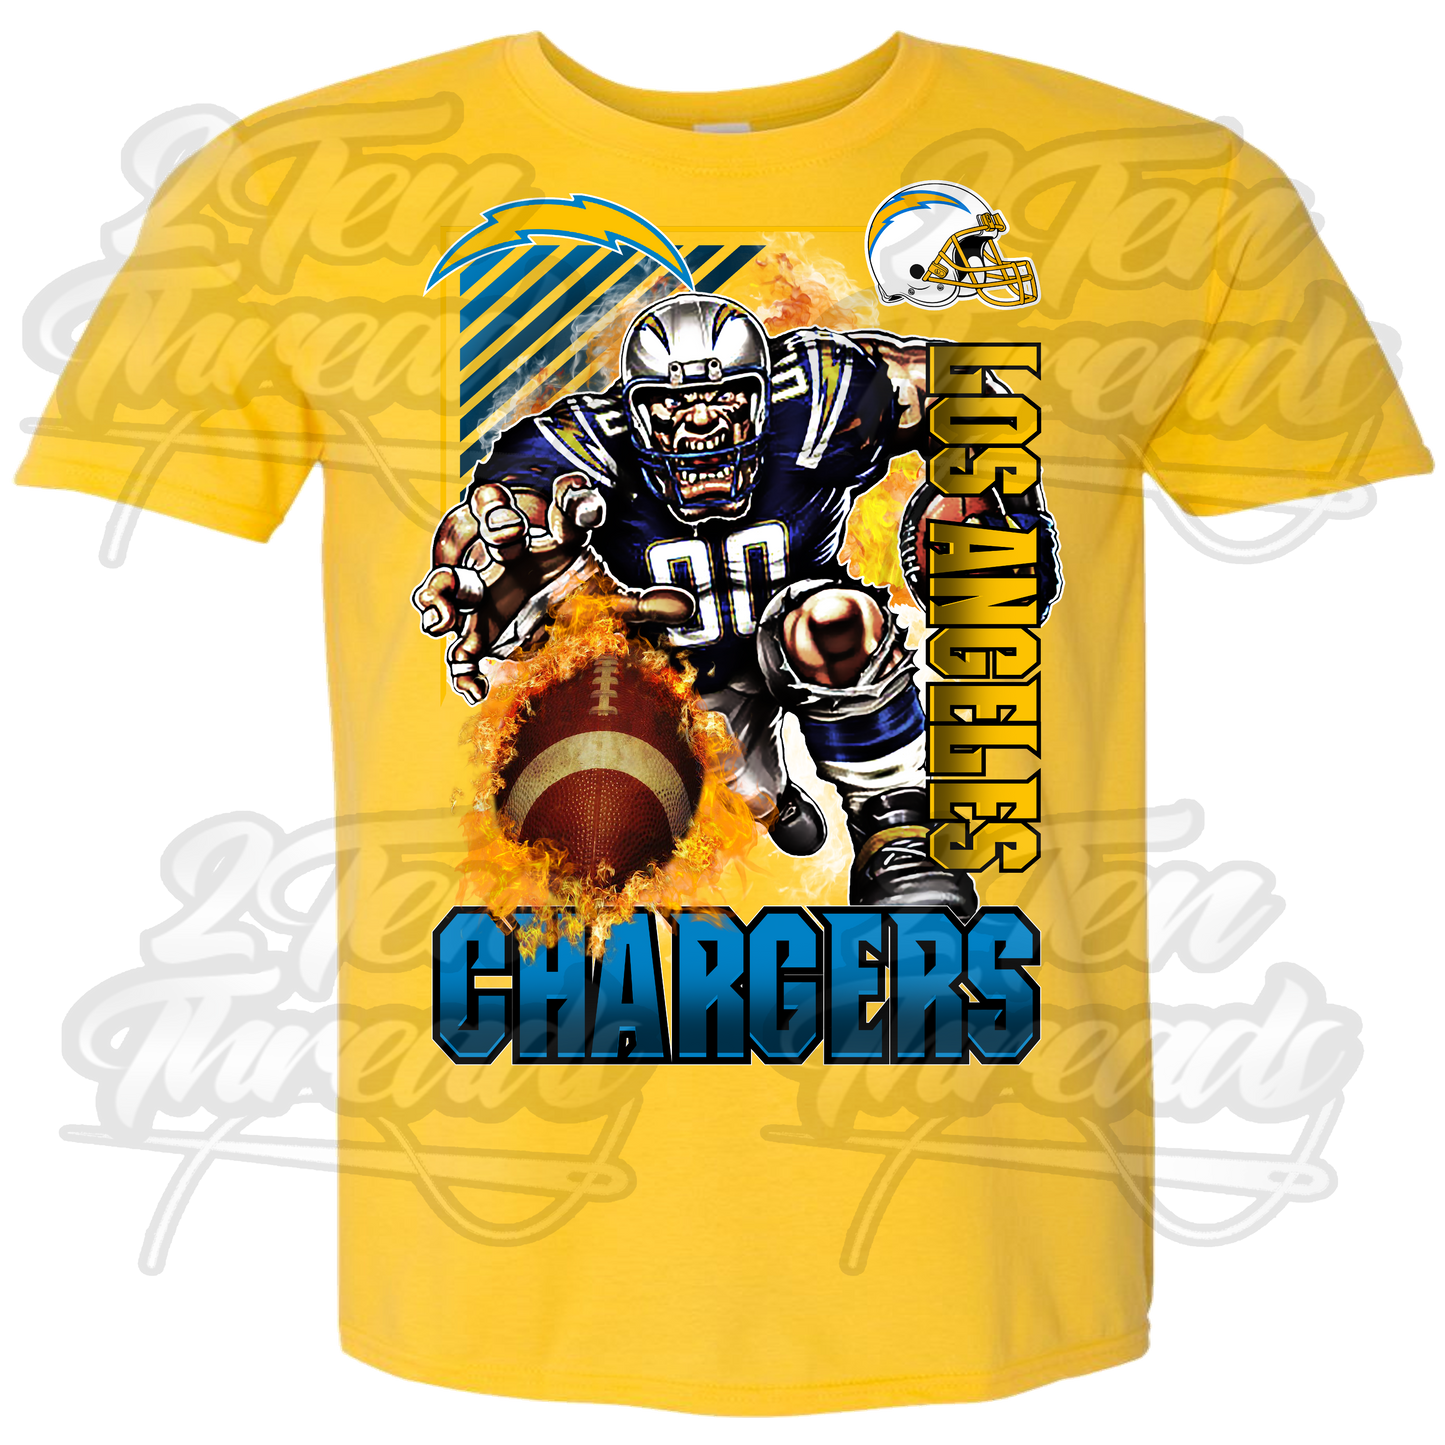 L.A. Chargers T-Shirt